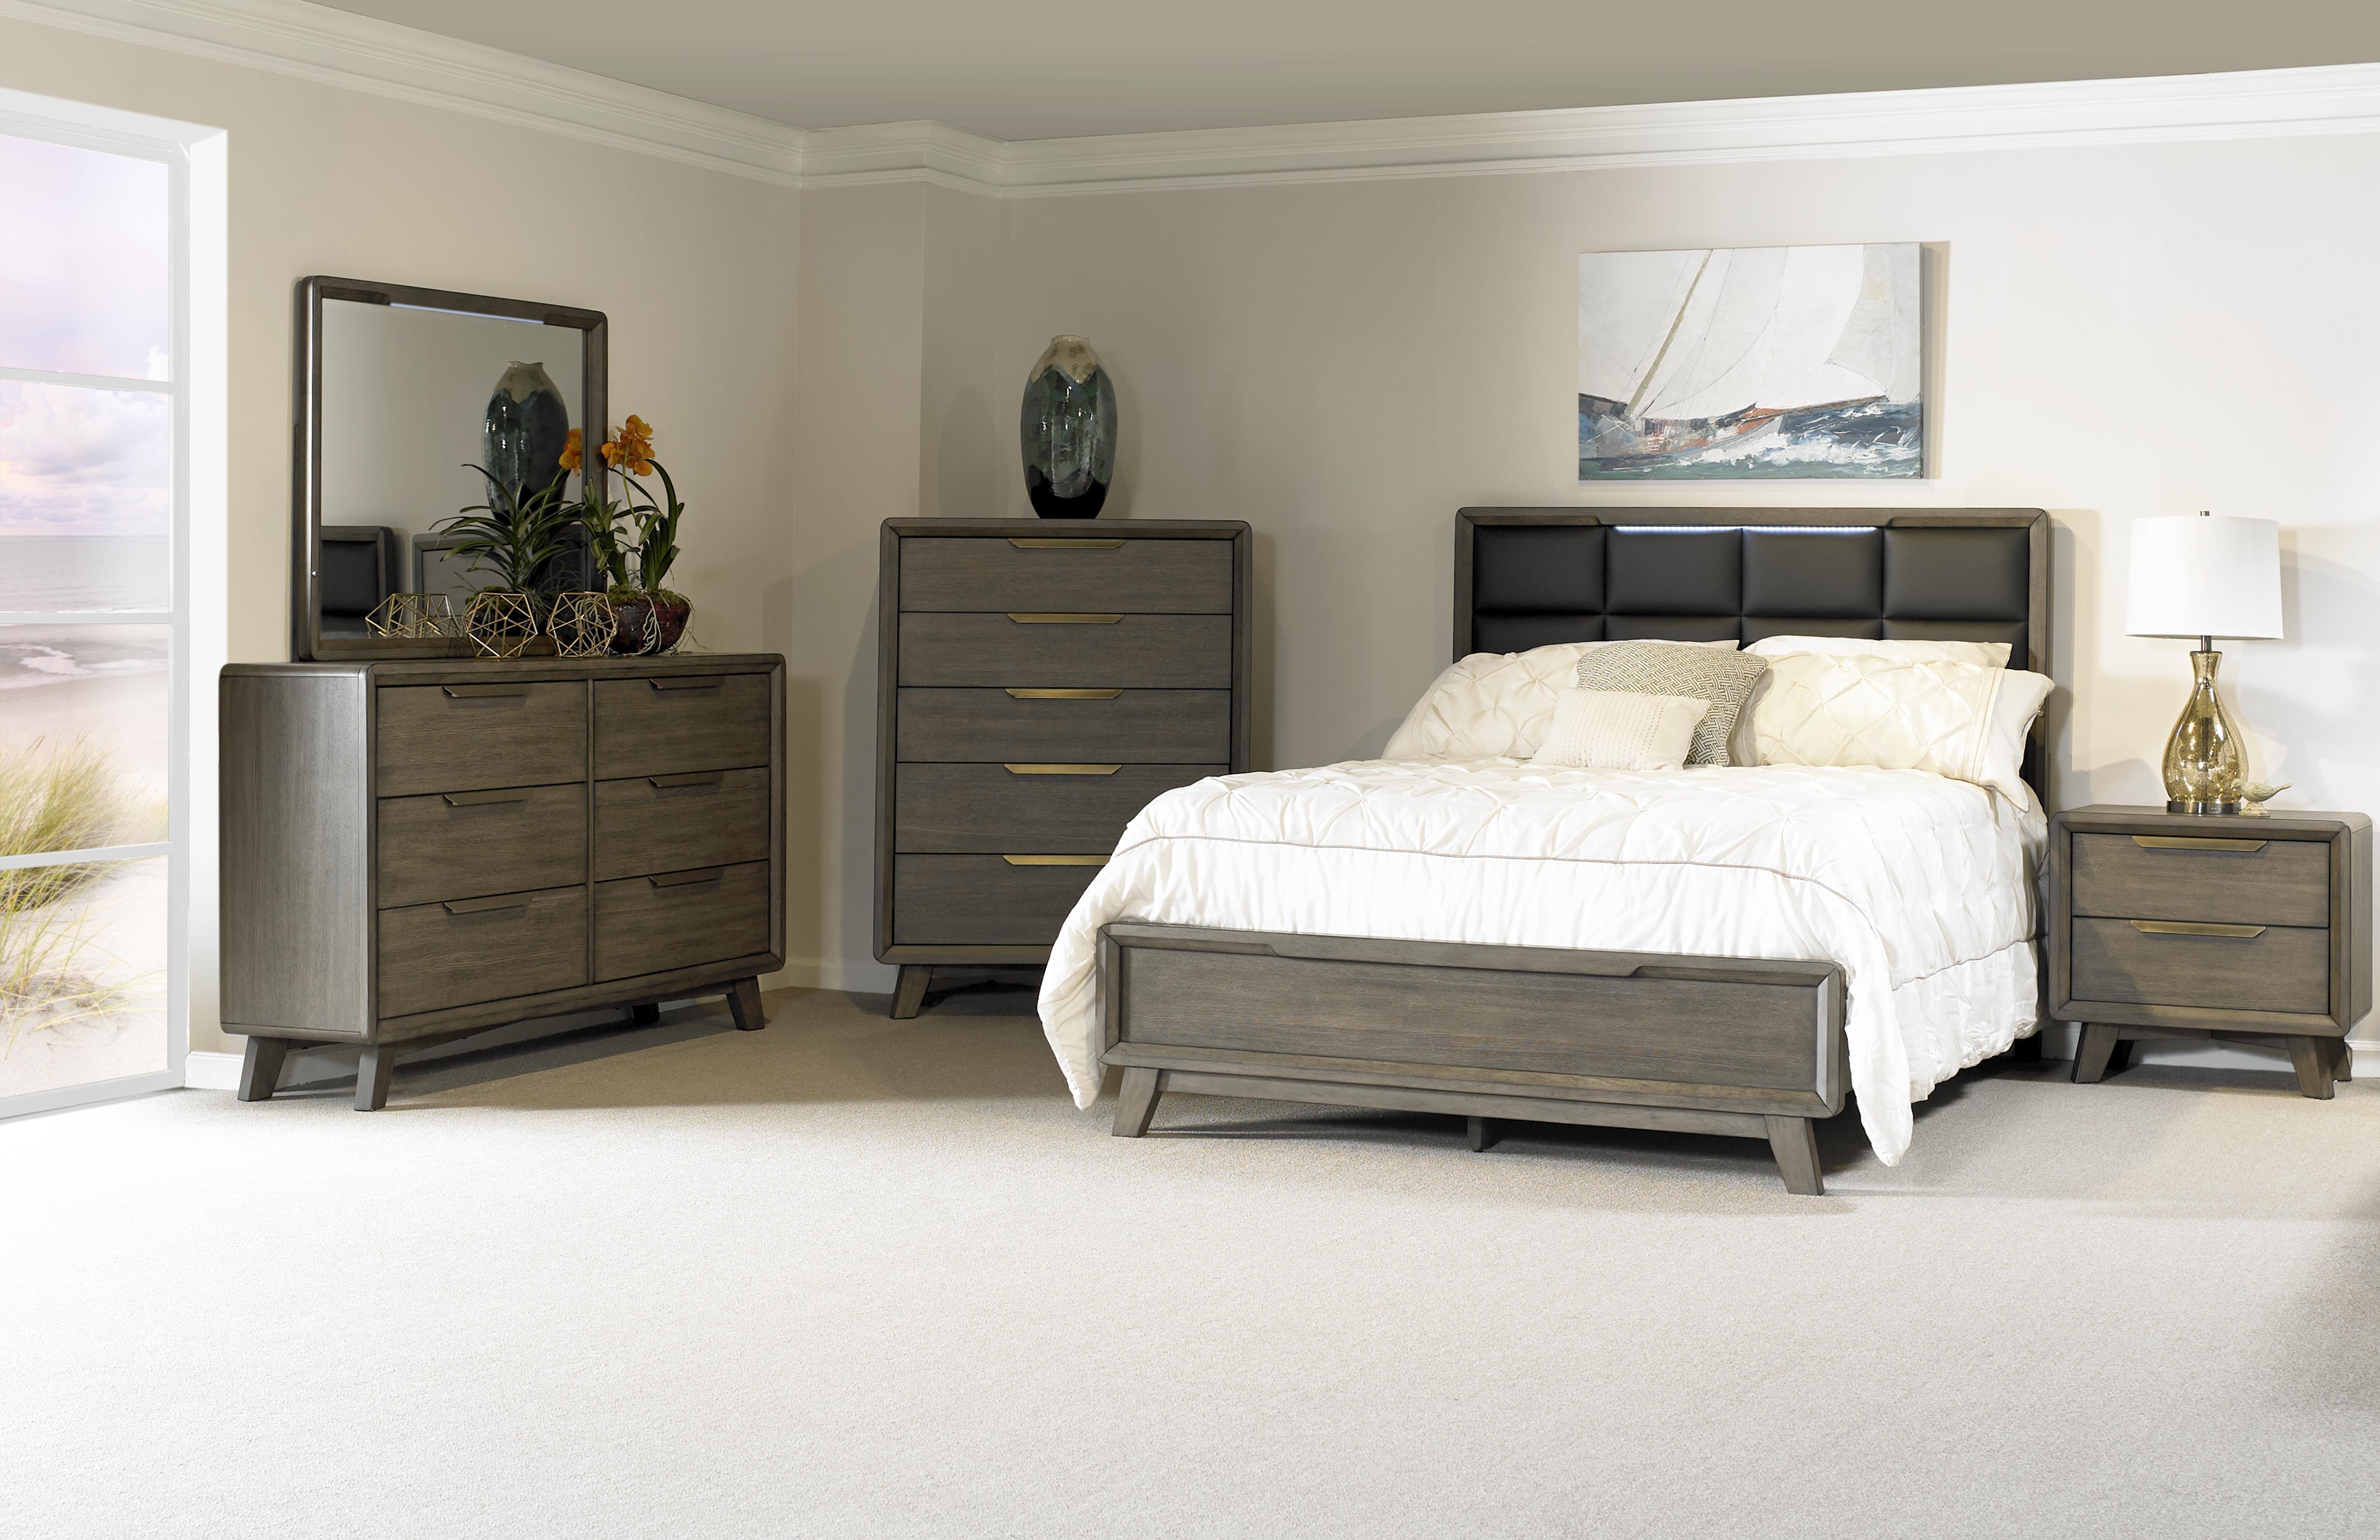 Contemporary, Modern Panel Bedroom Set VALENCIA 213-105-Set-6 213-105-2NDMC-6PC in Coffee, Brown Faux Leather